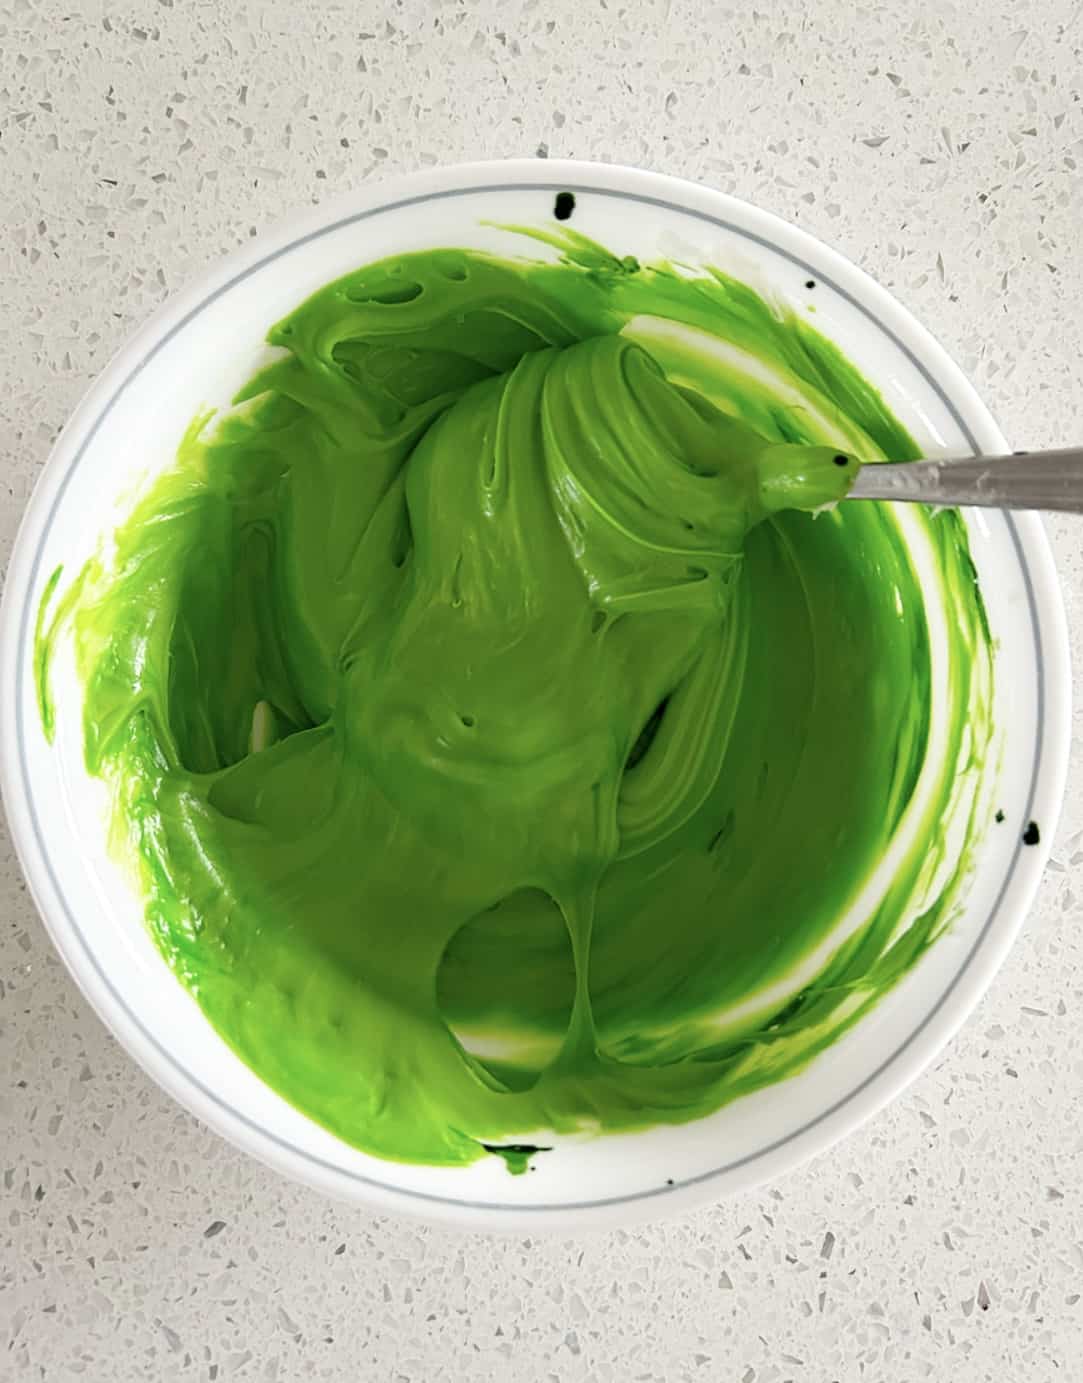 green food coloring in a bowl